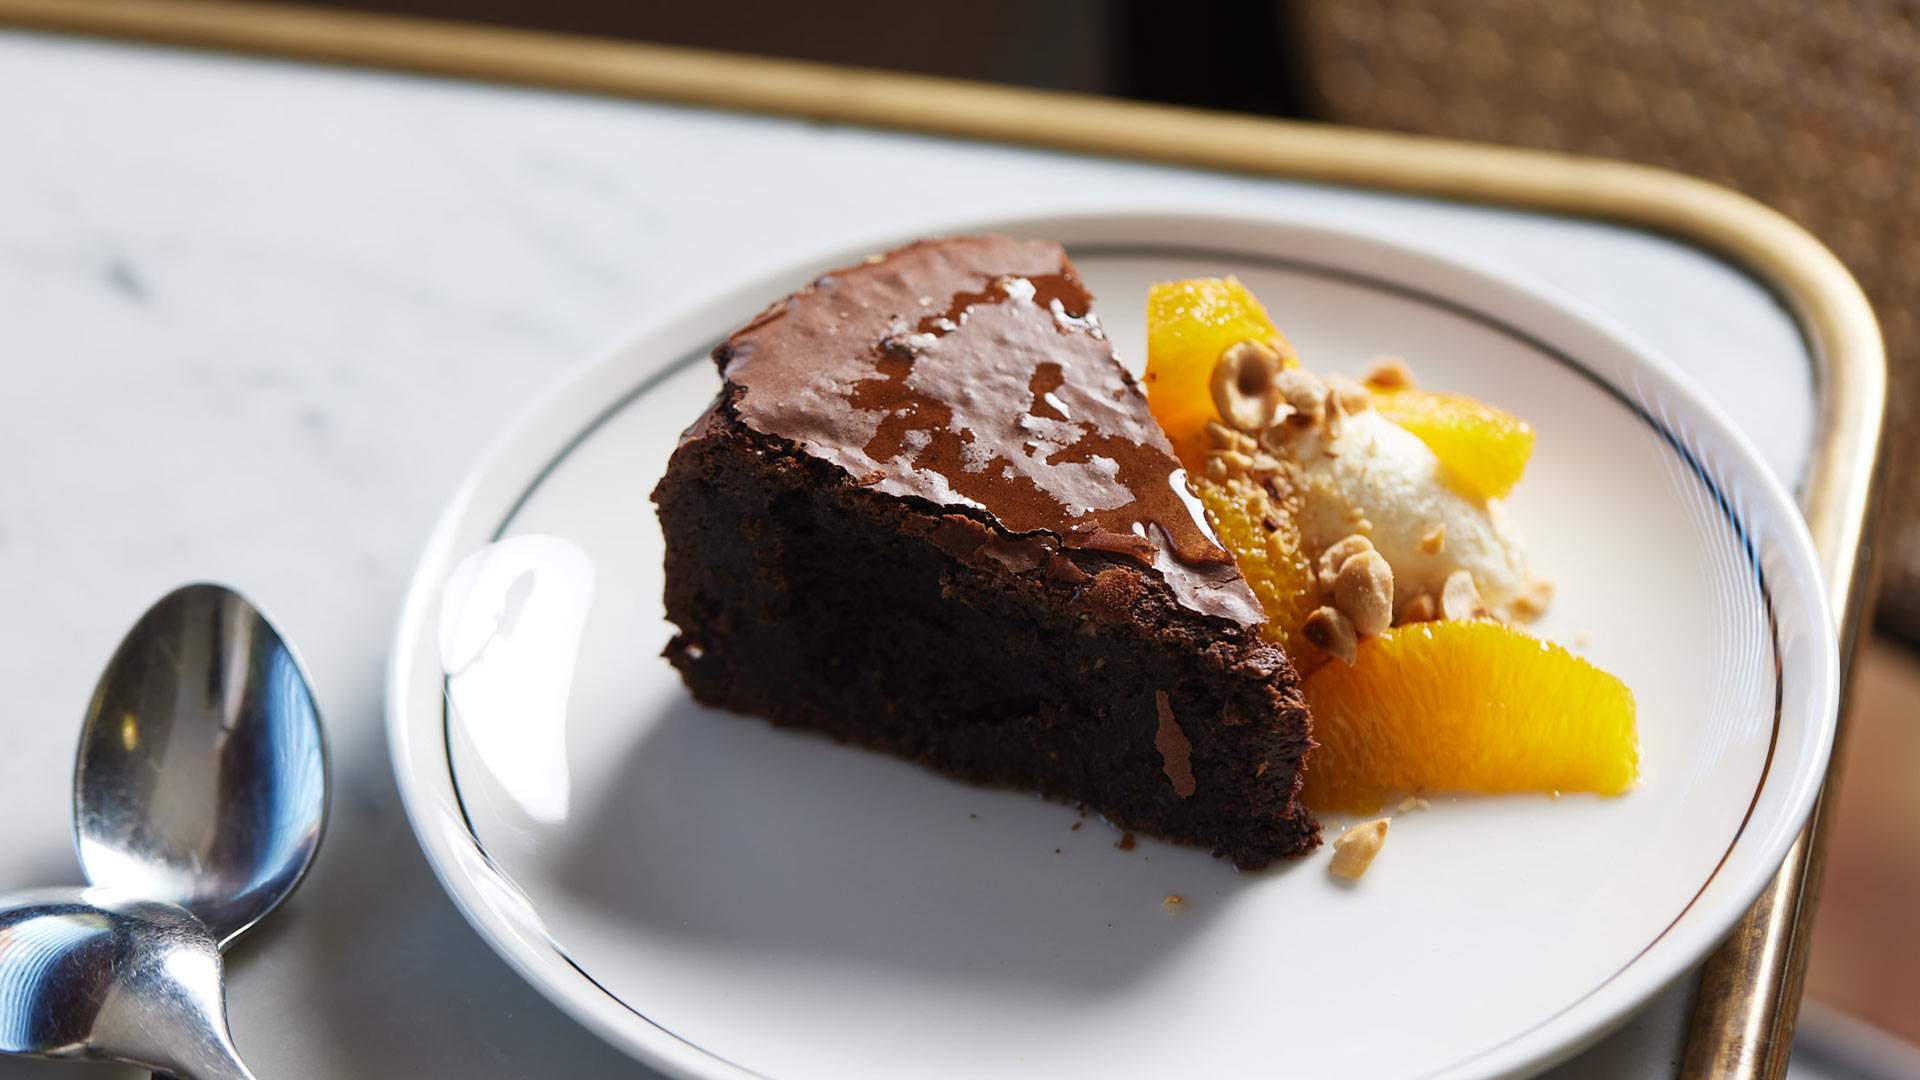 A glistening chocolate hazelnut cake with a side of nuts, cream and mandarin at The Erko.